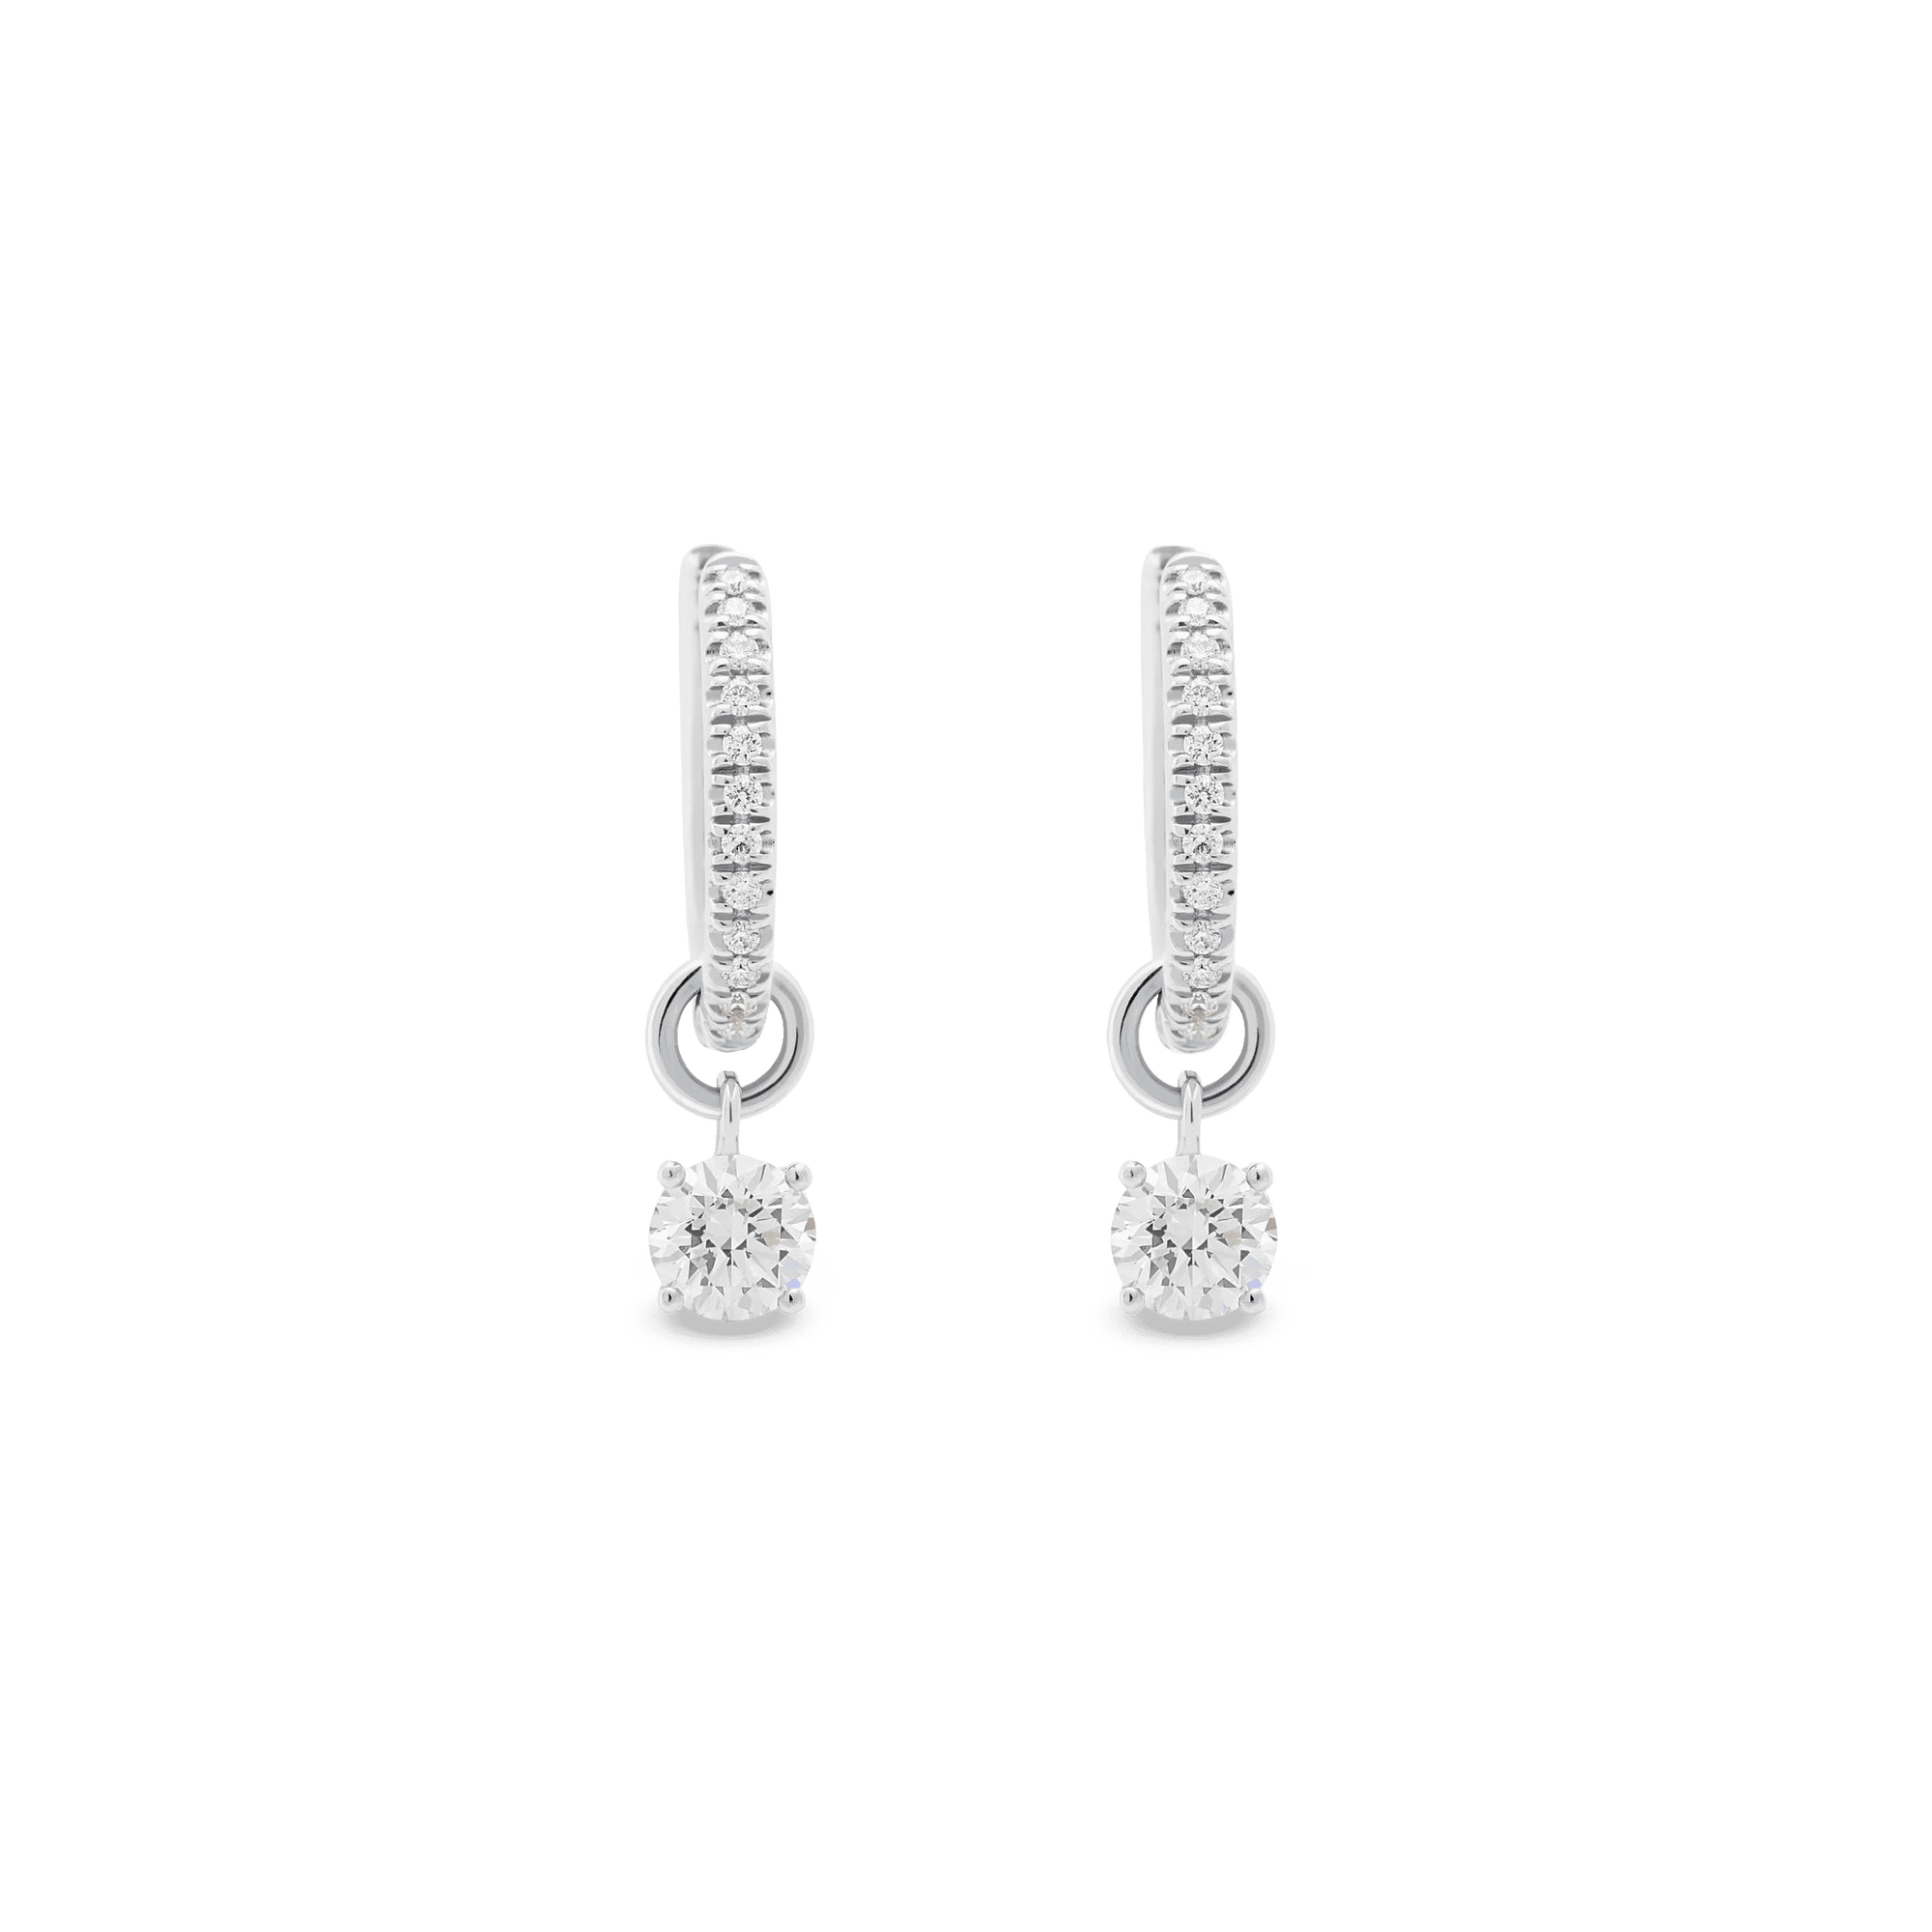 
					Zany_Shy_Emily_Earring_Diamond_Pave_Hoops_White-Gold_Lab-Grown-Diamond_2500x_175fea35-24cf-433e-b3c3-9aea9c9d522b.png